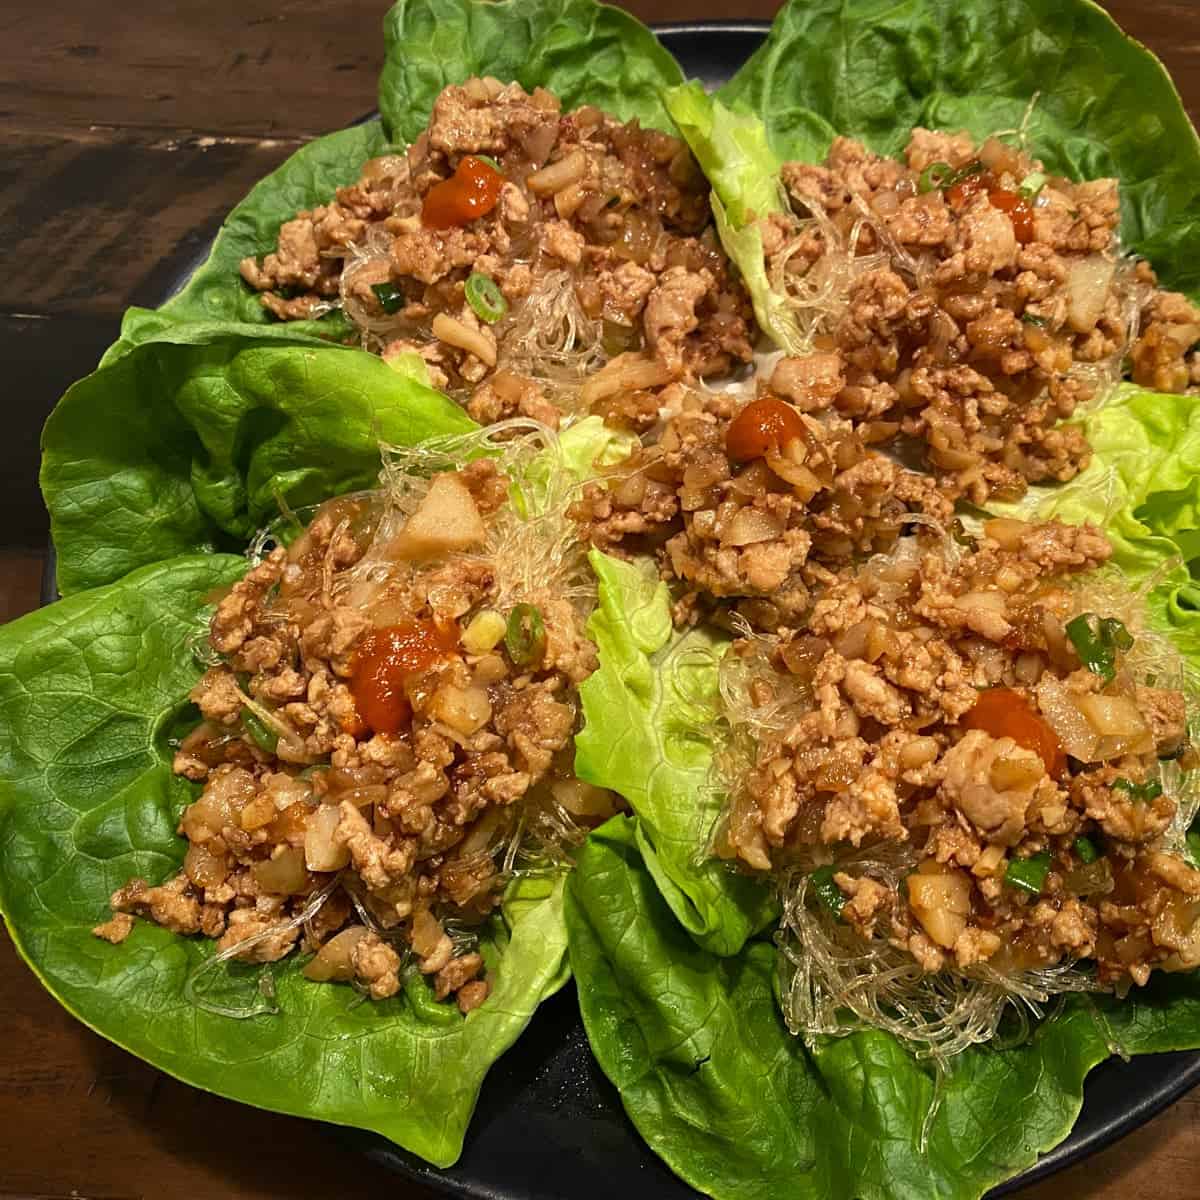 Chicken lettuce wraps on a black plate featured.